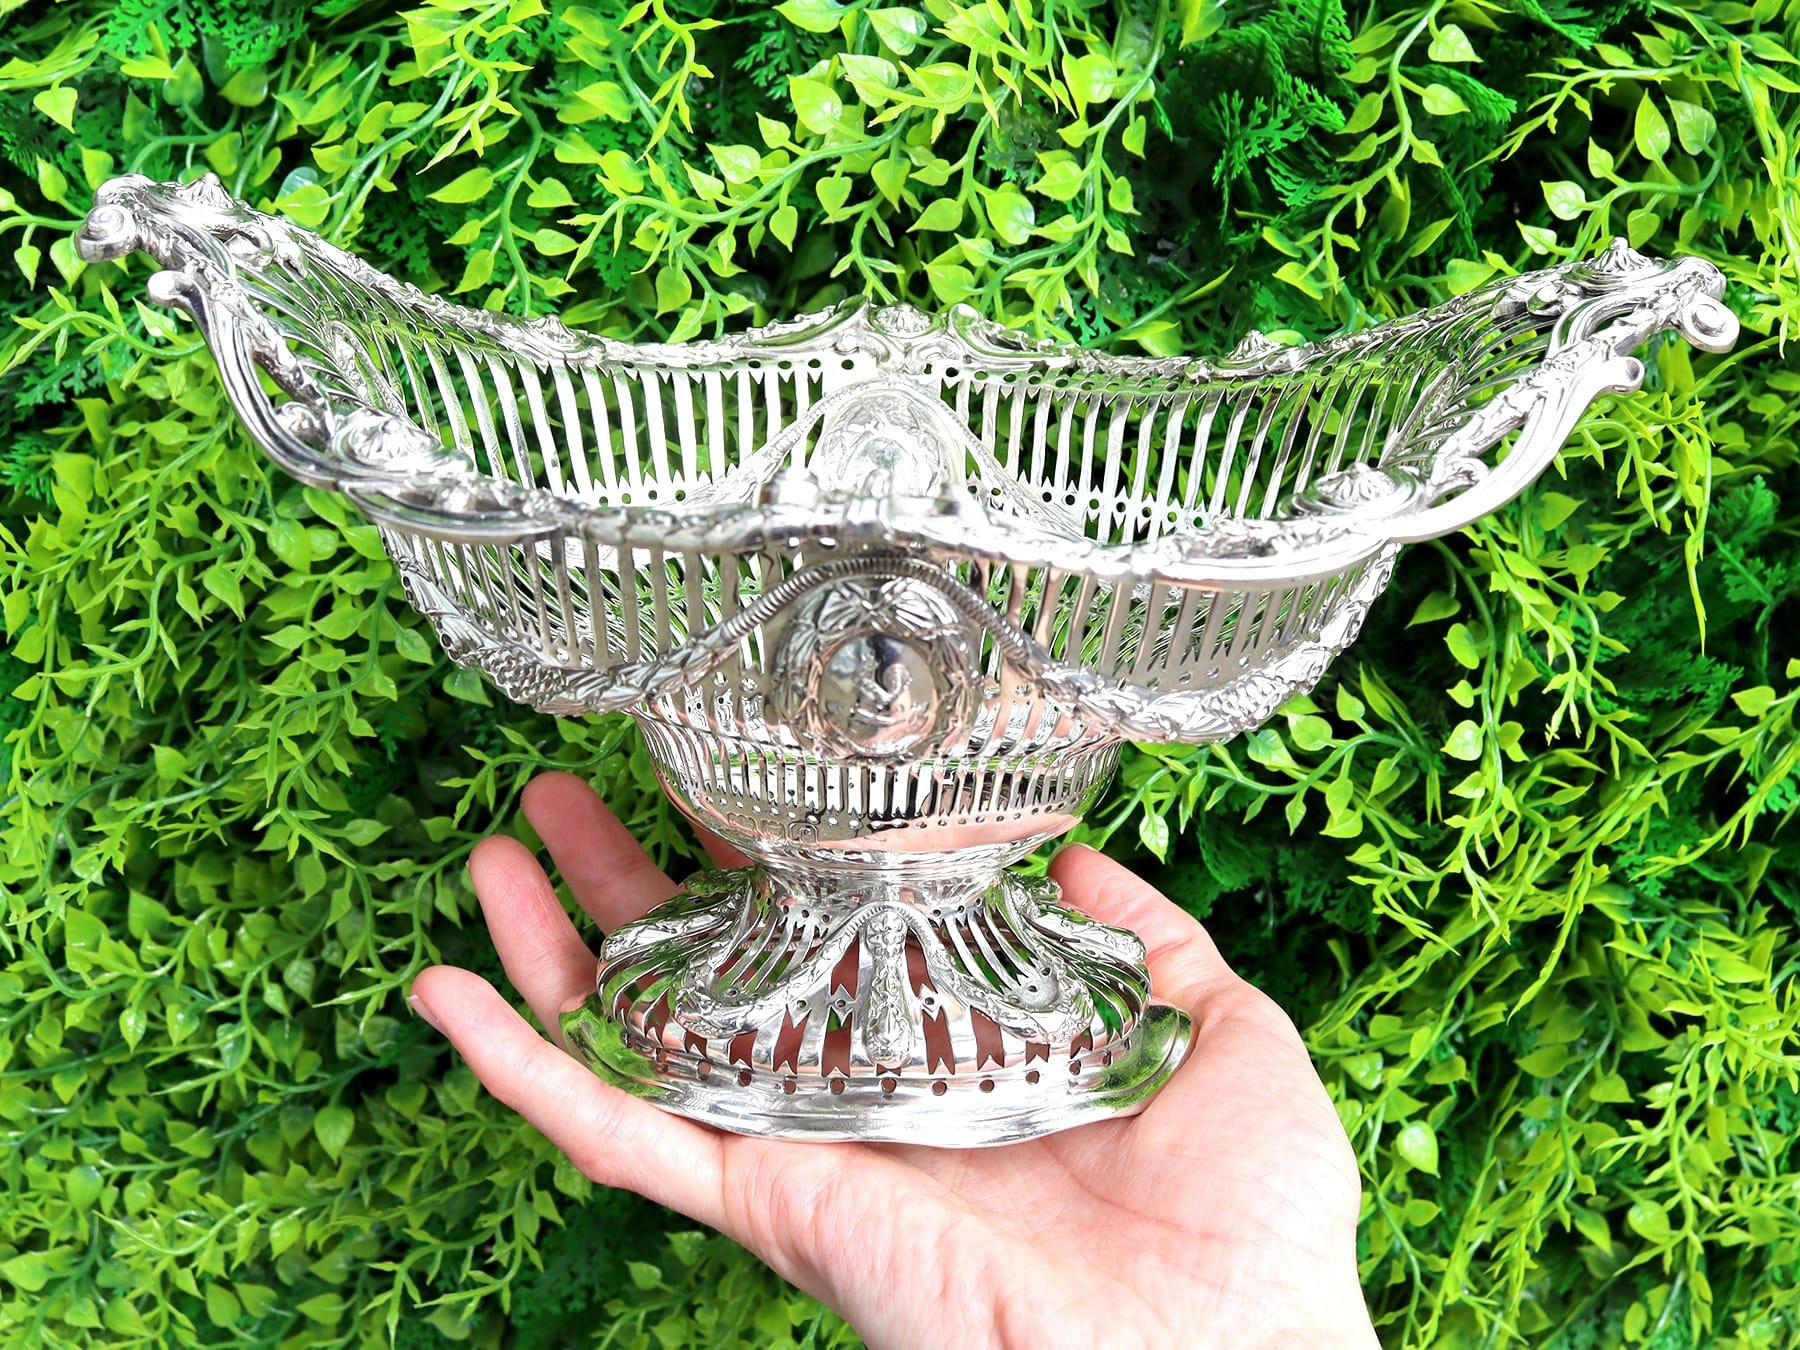 An exceptional, fine and impressive antique Edwardian English sterling silver bon bon / fruit dish; an addition to our dining silverware collection.

This exceptional antique Edwardian sterling silver bon bon/fruit dish has an oval boat shaped form